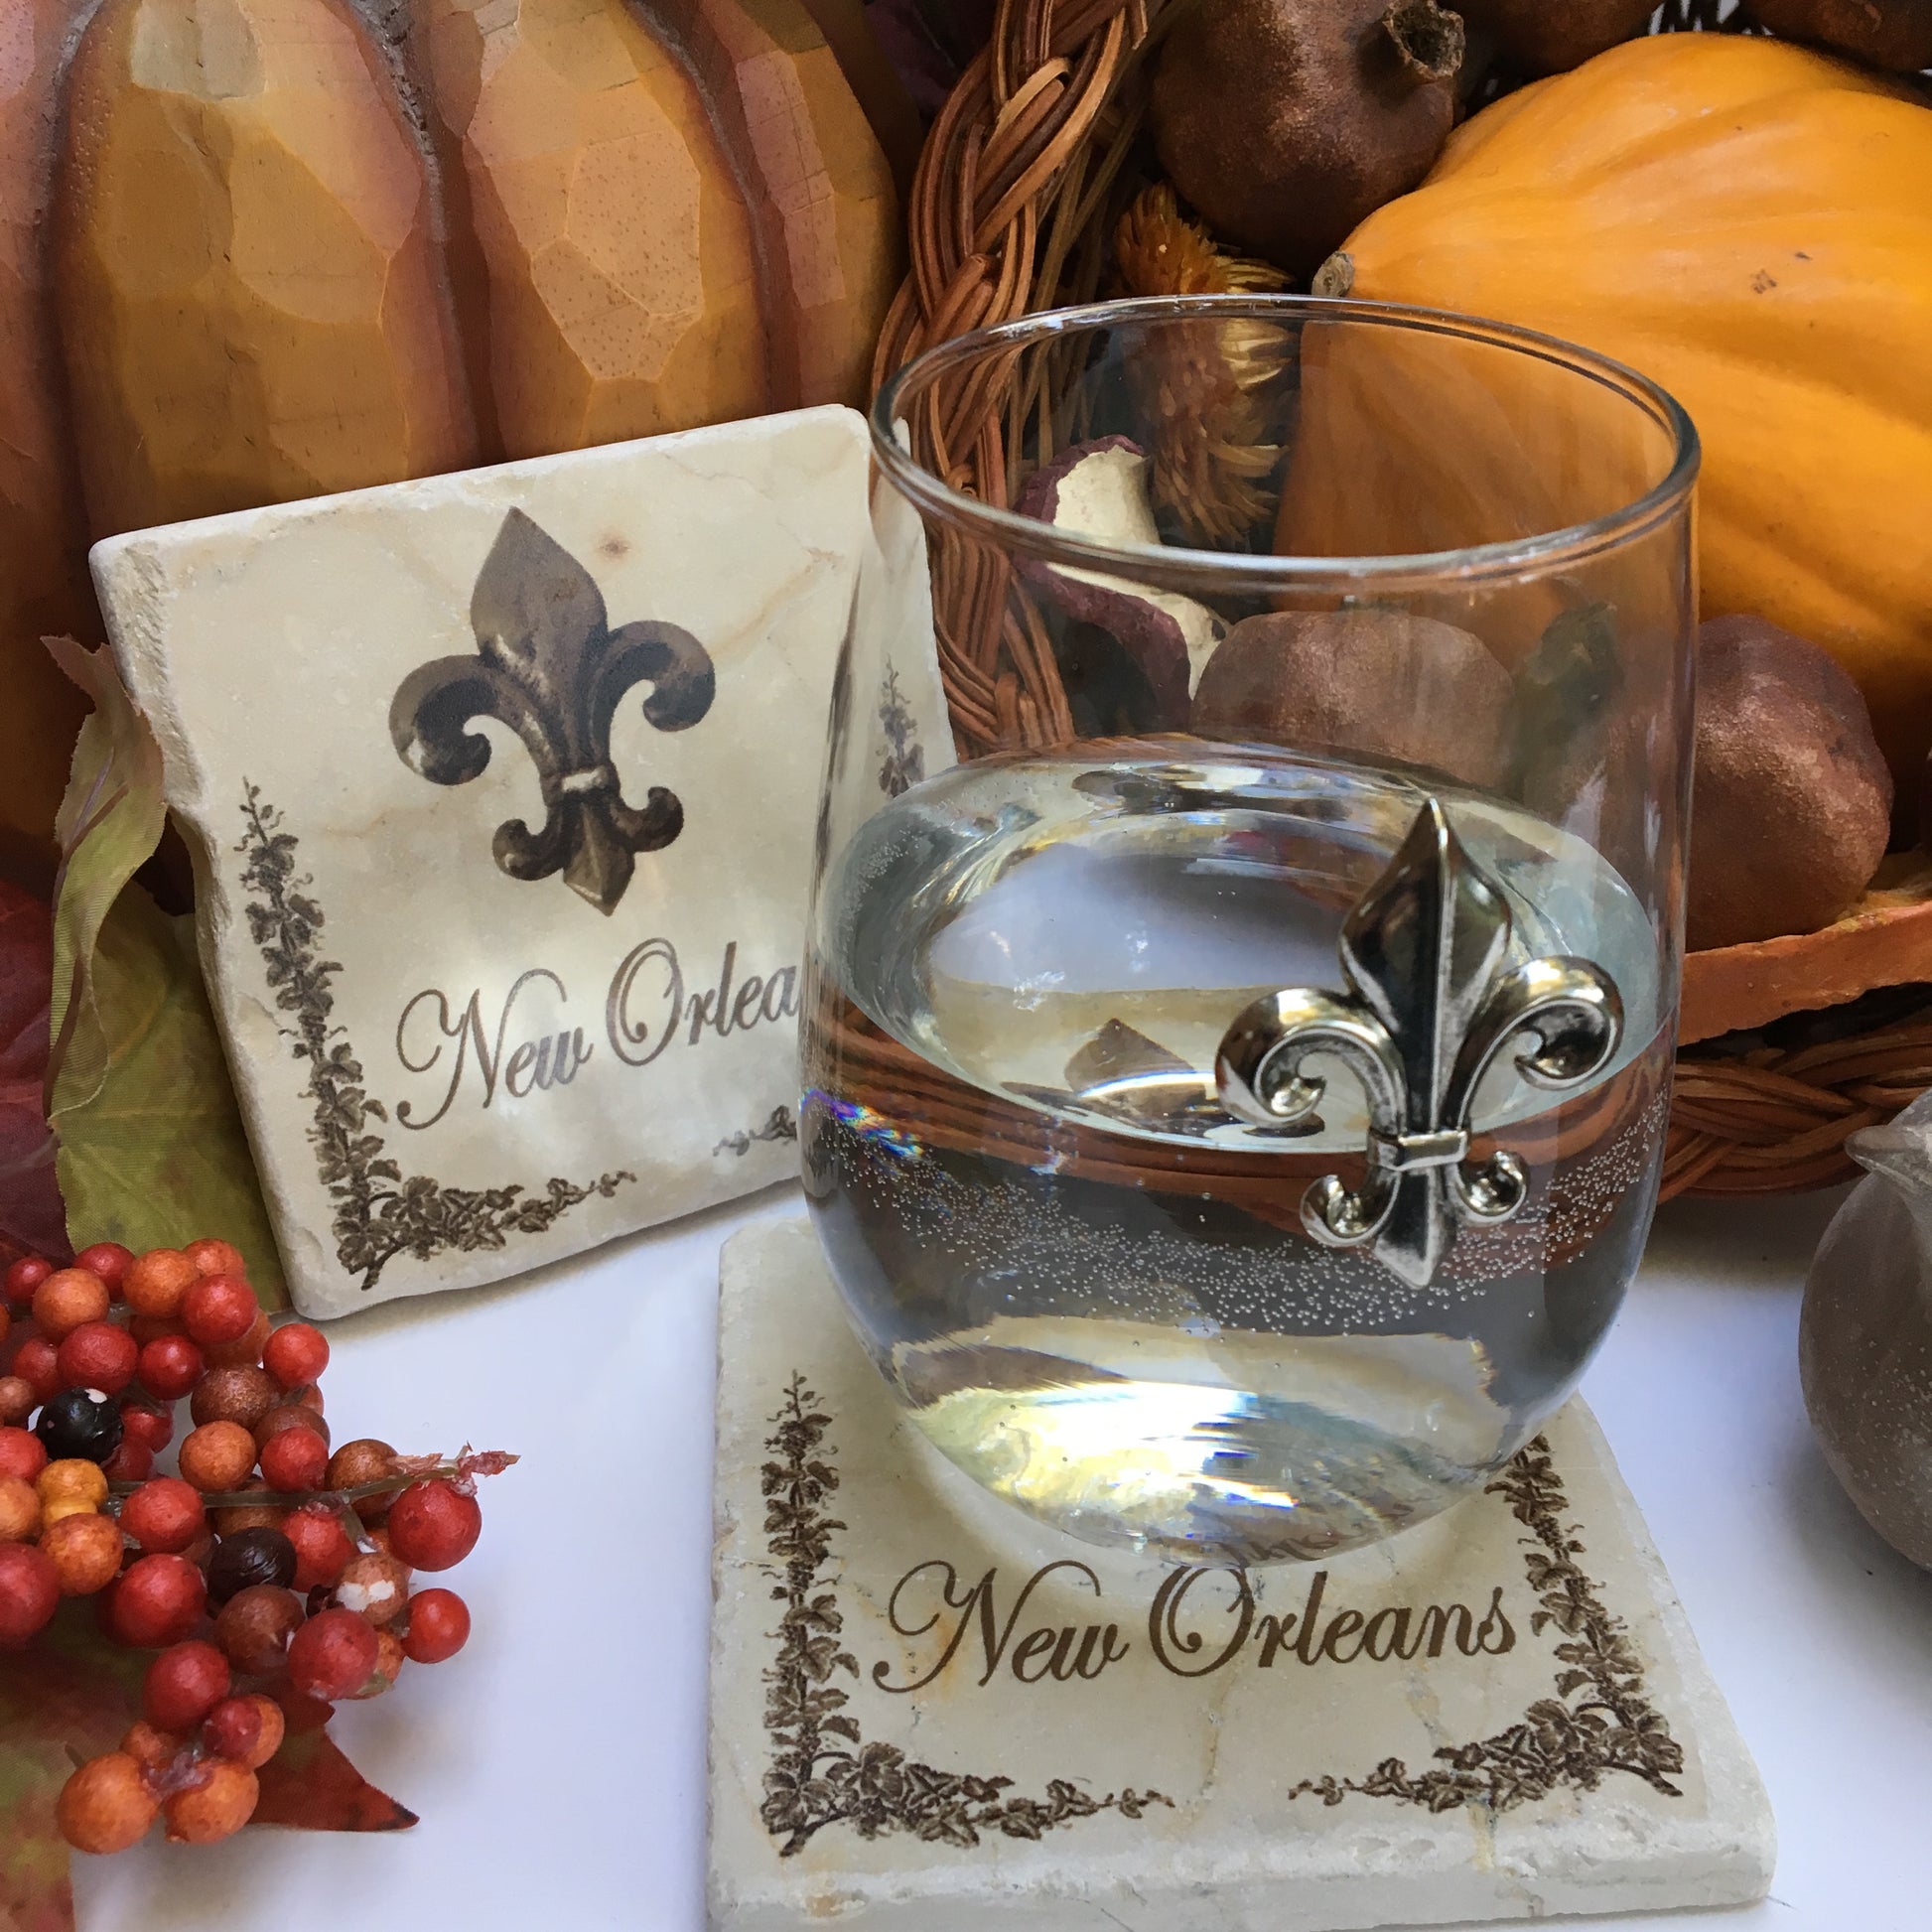 Stemless wine glass with Silver Fleur de Lis medallion. The Classic Legacy stemless wine glass holds 17 ounces of wine. Dimensions are 4.75” x 2.75”. Great table top gift for fleur de lis lovers!  